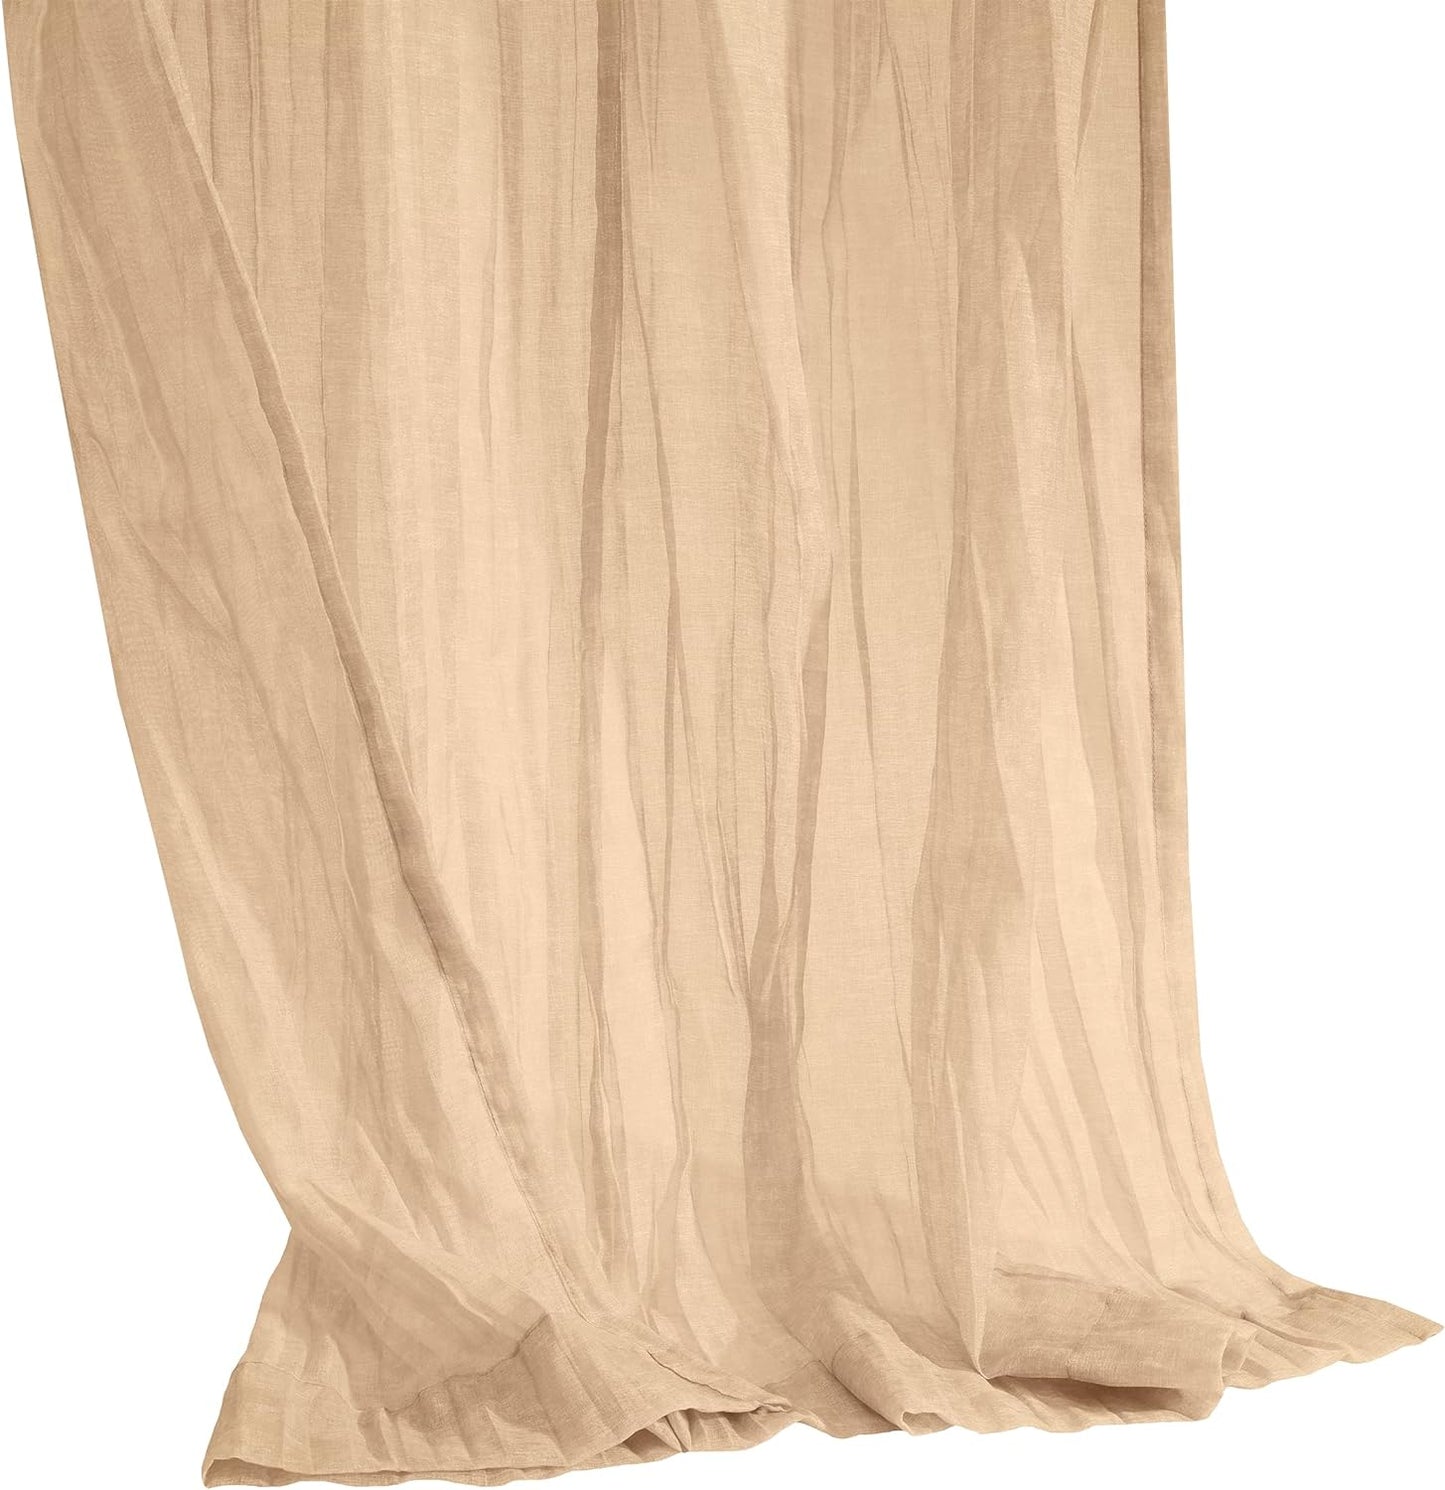 Richmark International Paloma Sheer Dual Header Curtain Panel 52 X 95 in Apricot  Commonwealth Home Fashions   